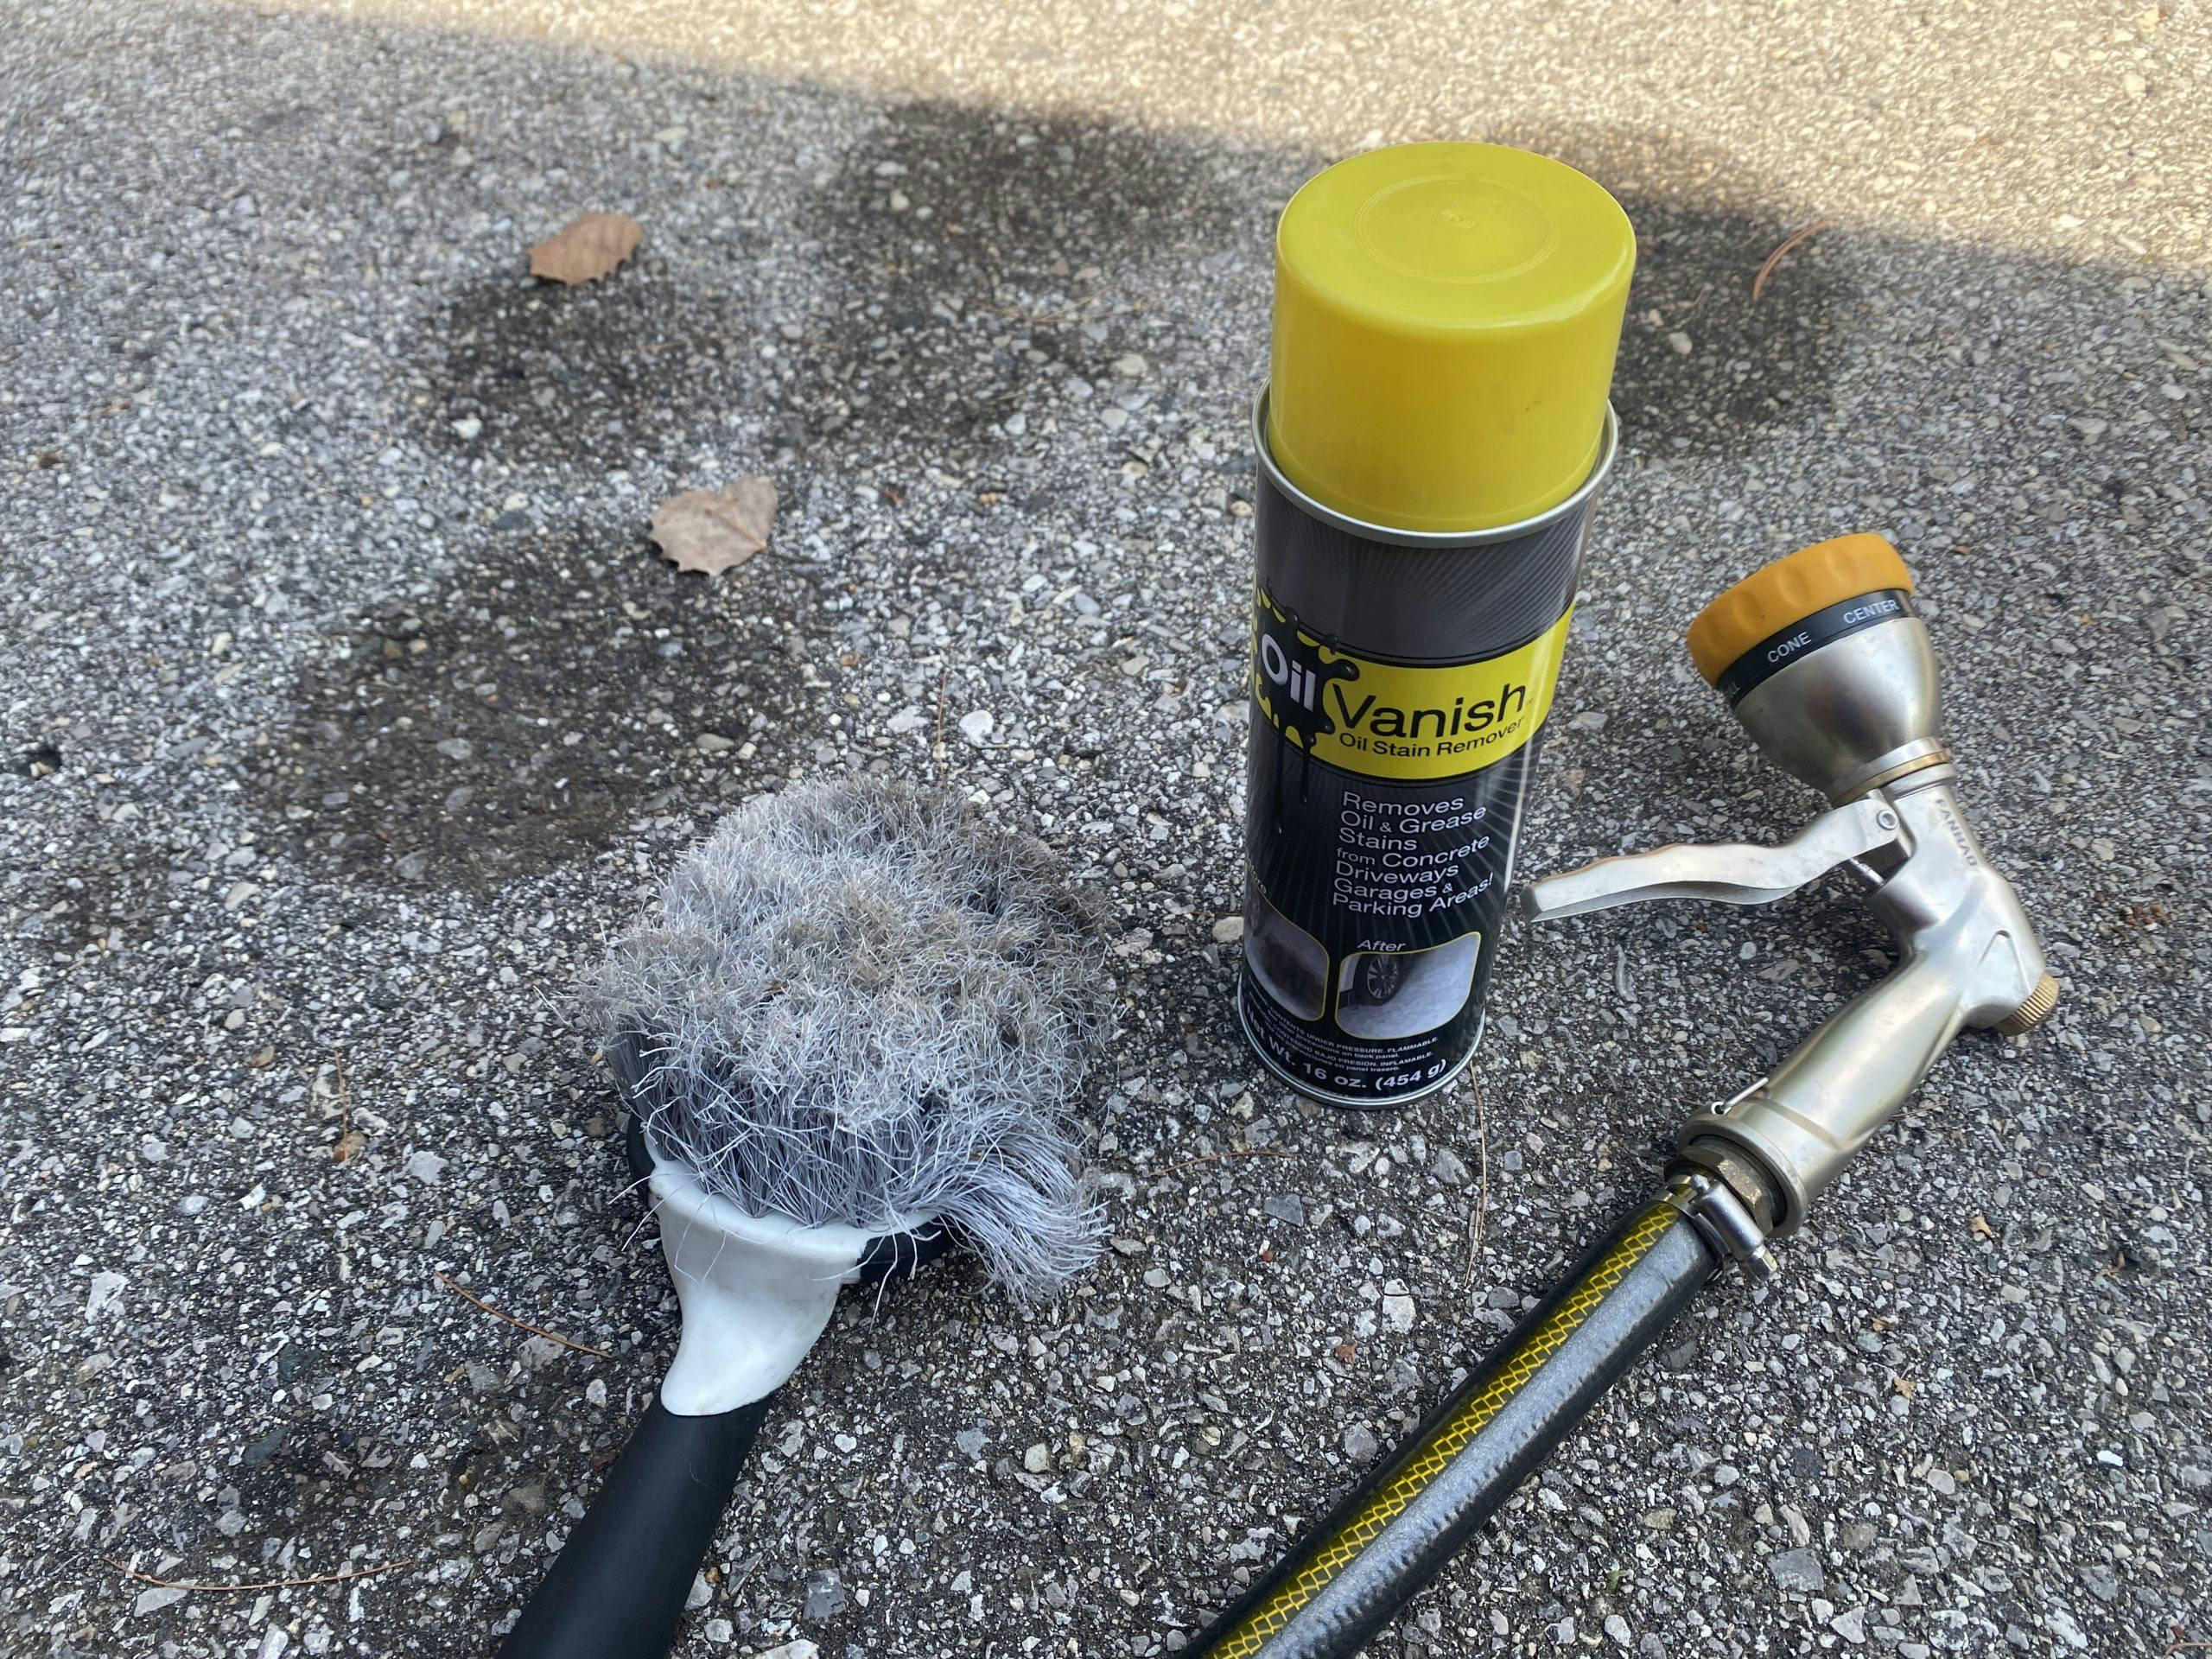 oil vanish, brush, and hose with stain